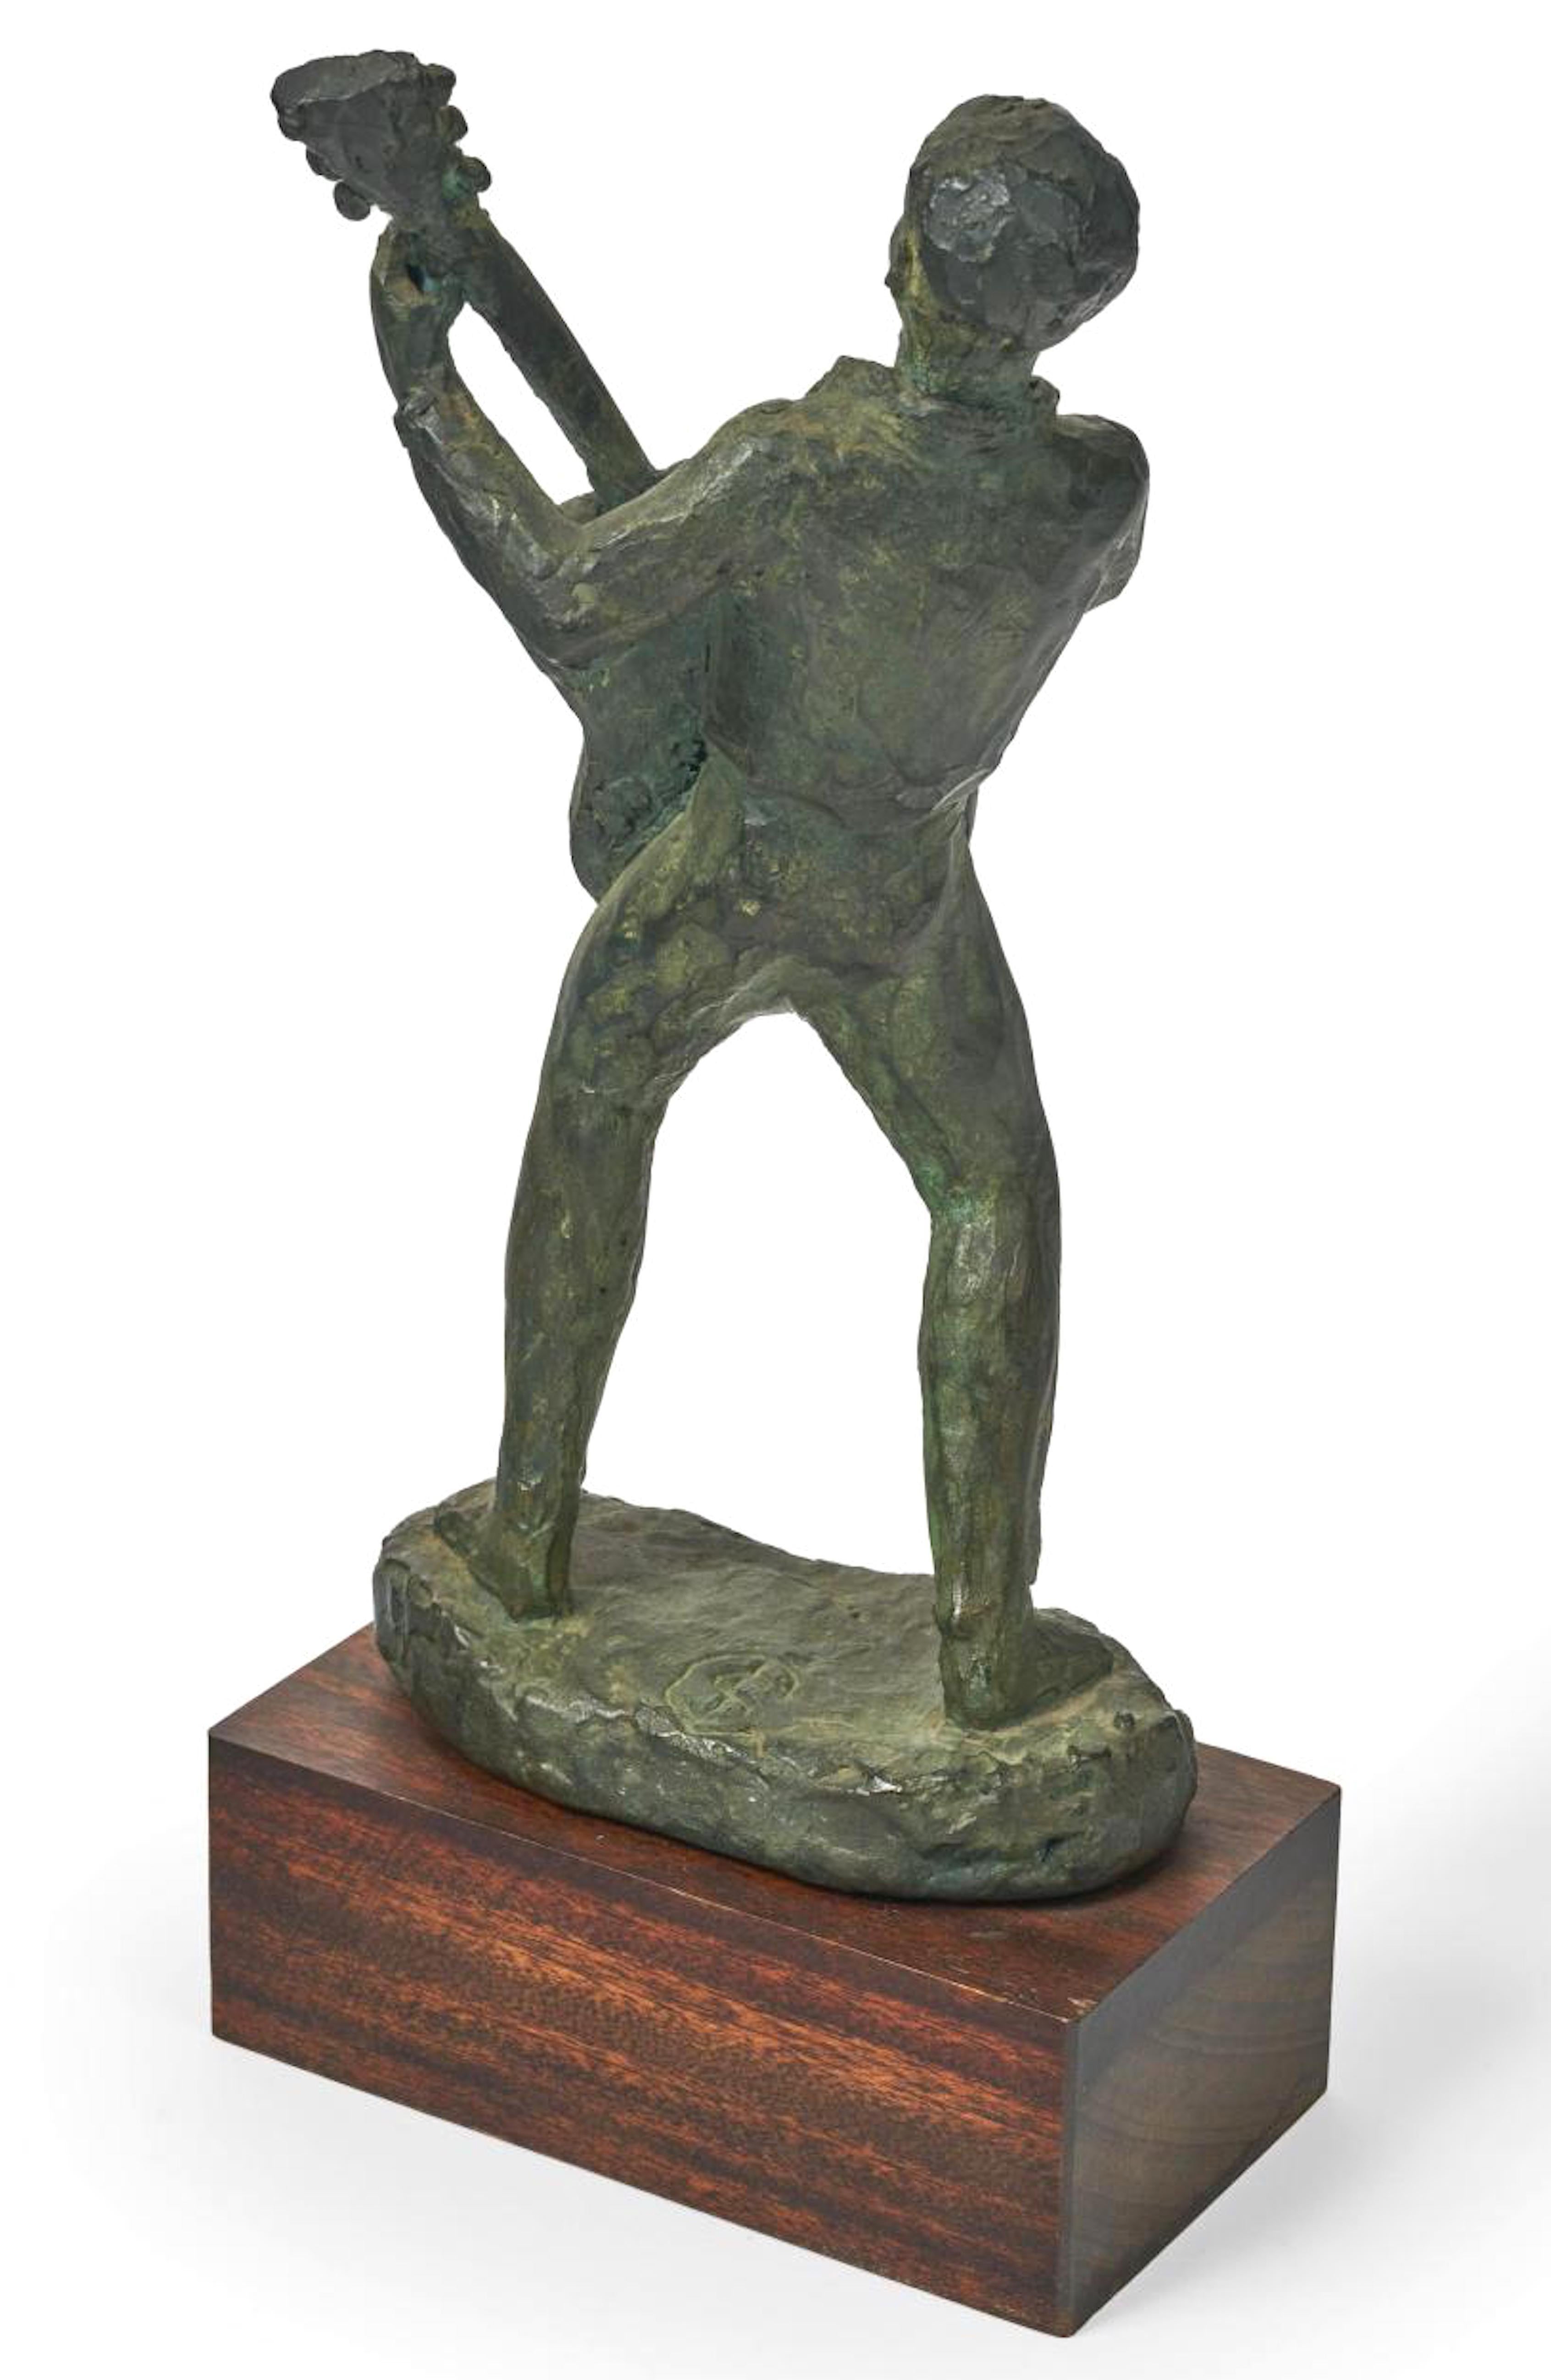 Great little Mid-Century Modern bronze of a guitar player rocking out on wood plinth. This piece is signed with a monogram consisting of a C with a dollar sign. Very nice patina and measuring 9